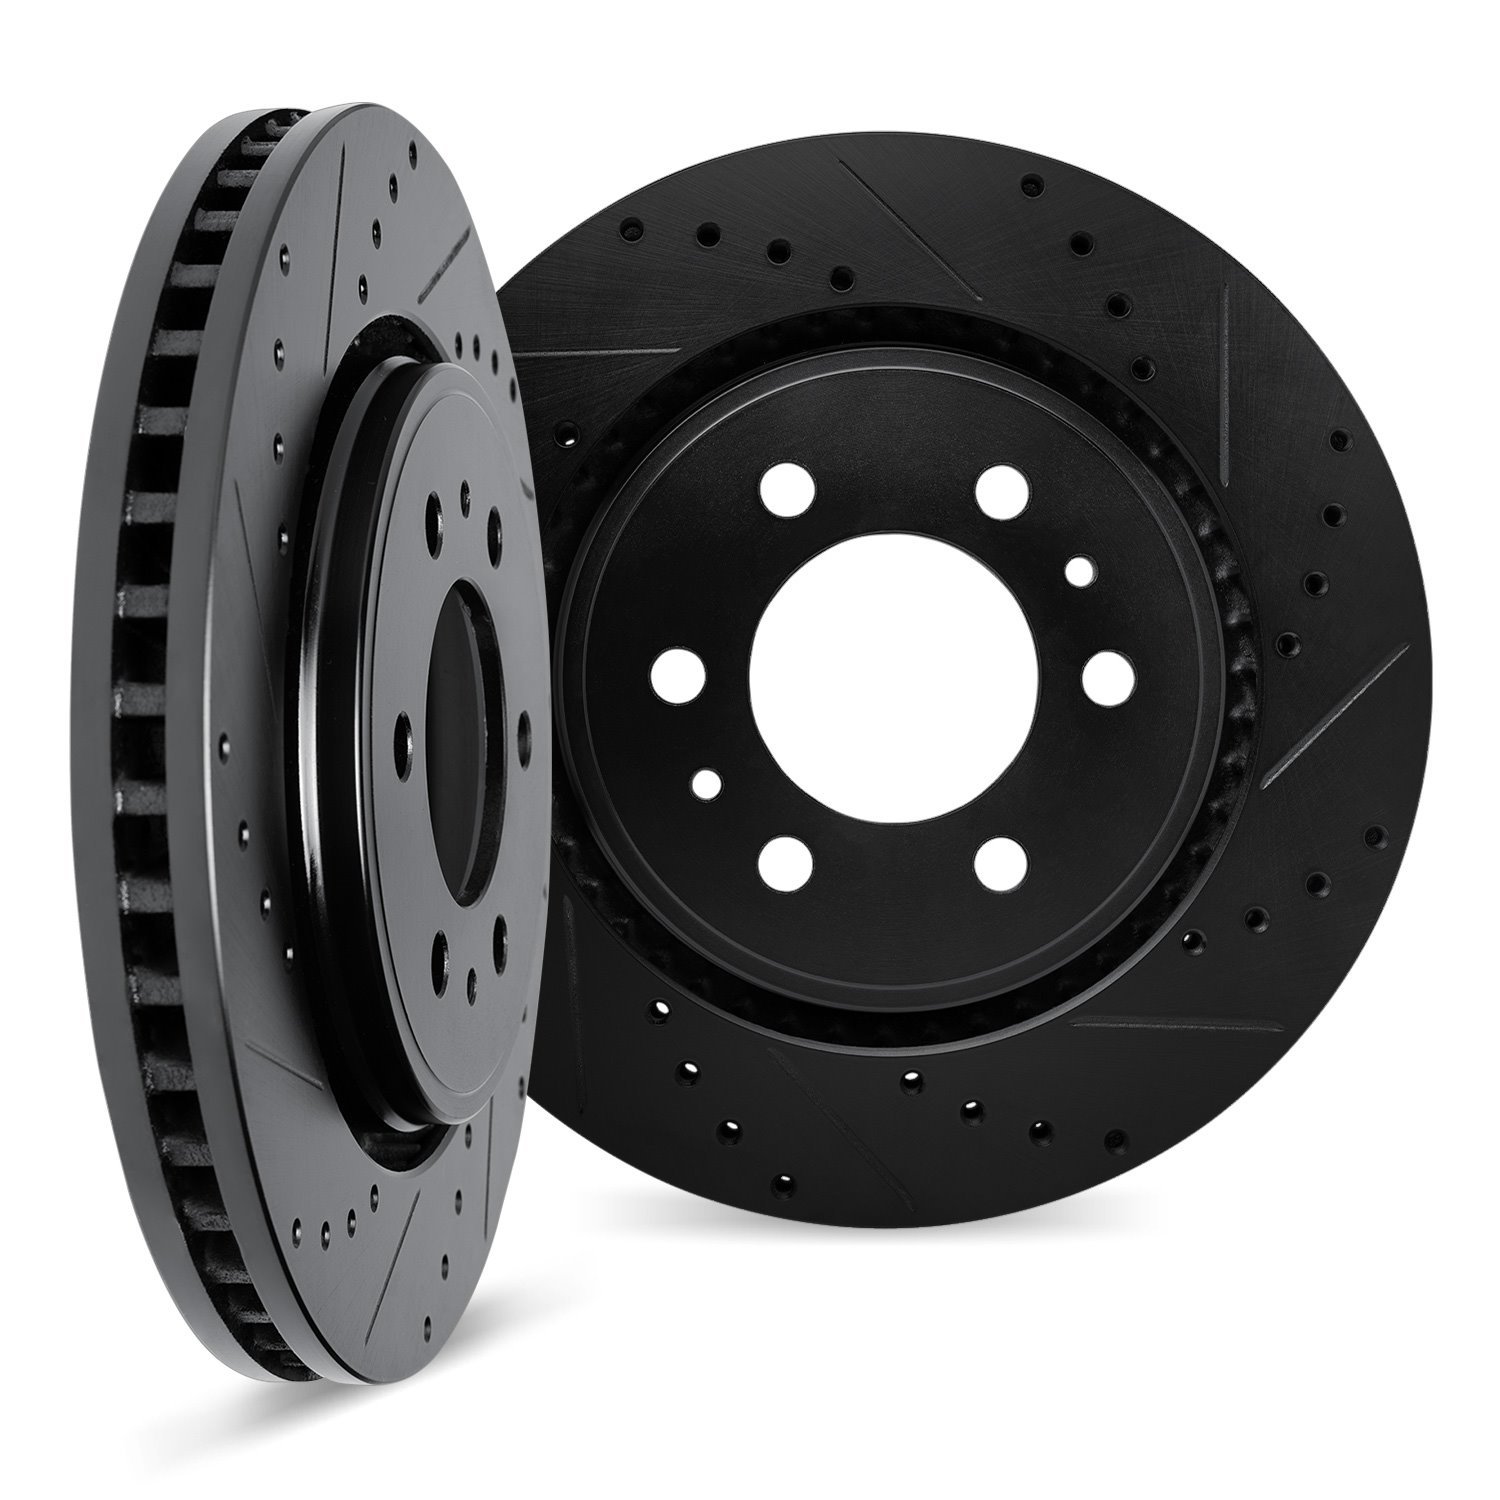 8002-54257 Drilled/Slotted Brake Rotors [Black], Fits Select Ford/Lincoln/Mercury/Mazda, Position: Rear